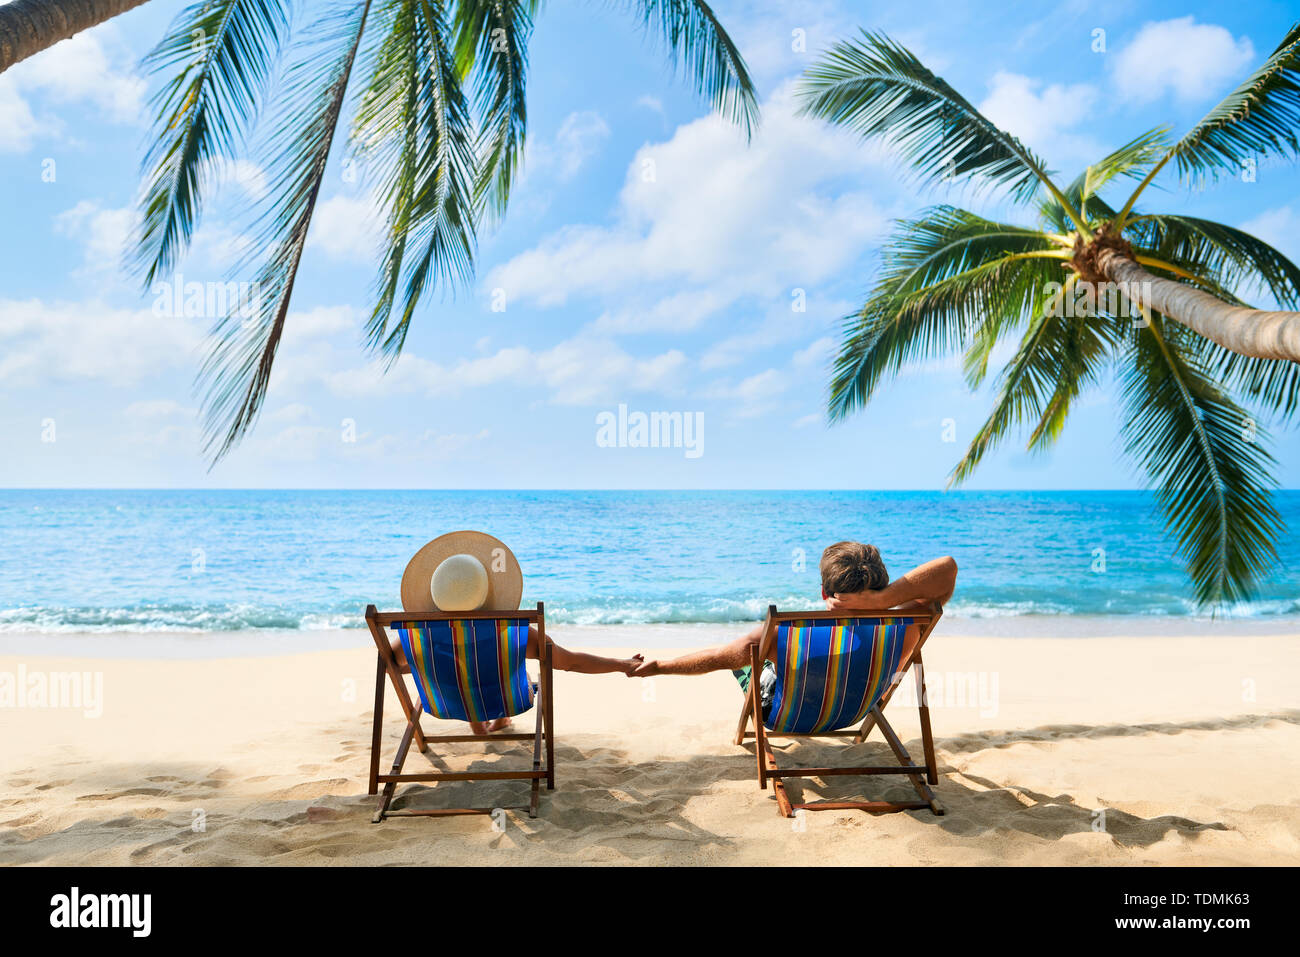 Couple relax on the beach enjoying beautiful sea on the tropical island. Summer beach vacation concept Stock Photo